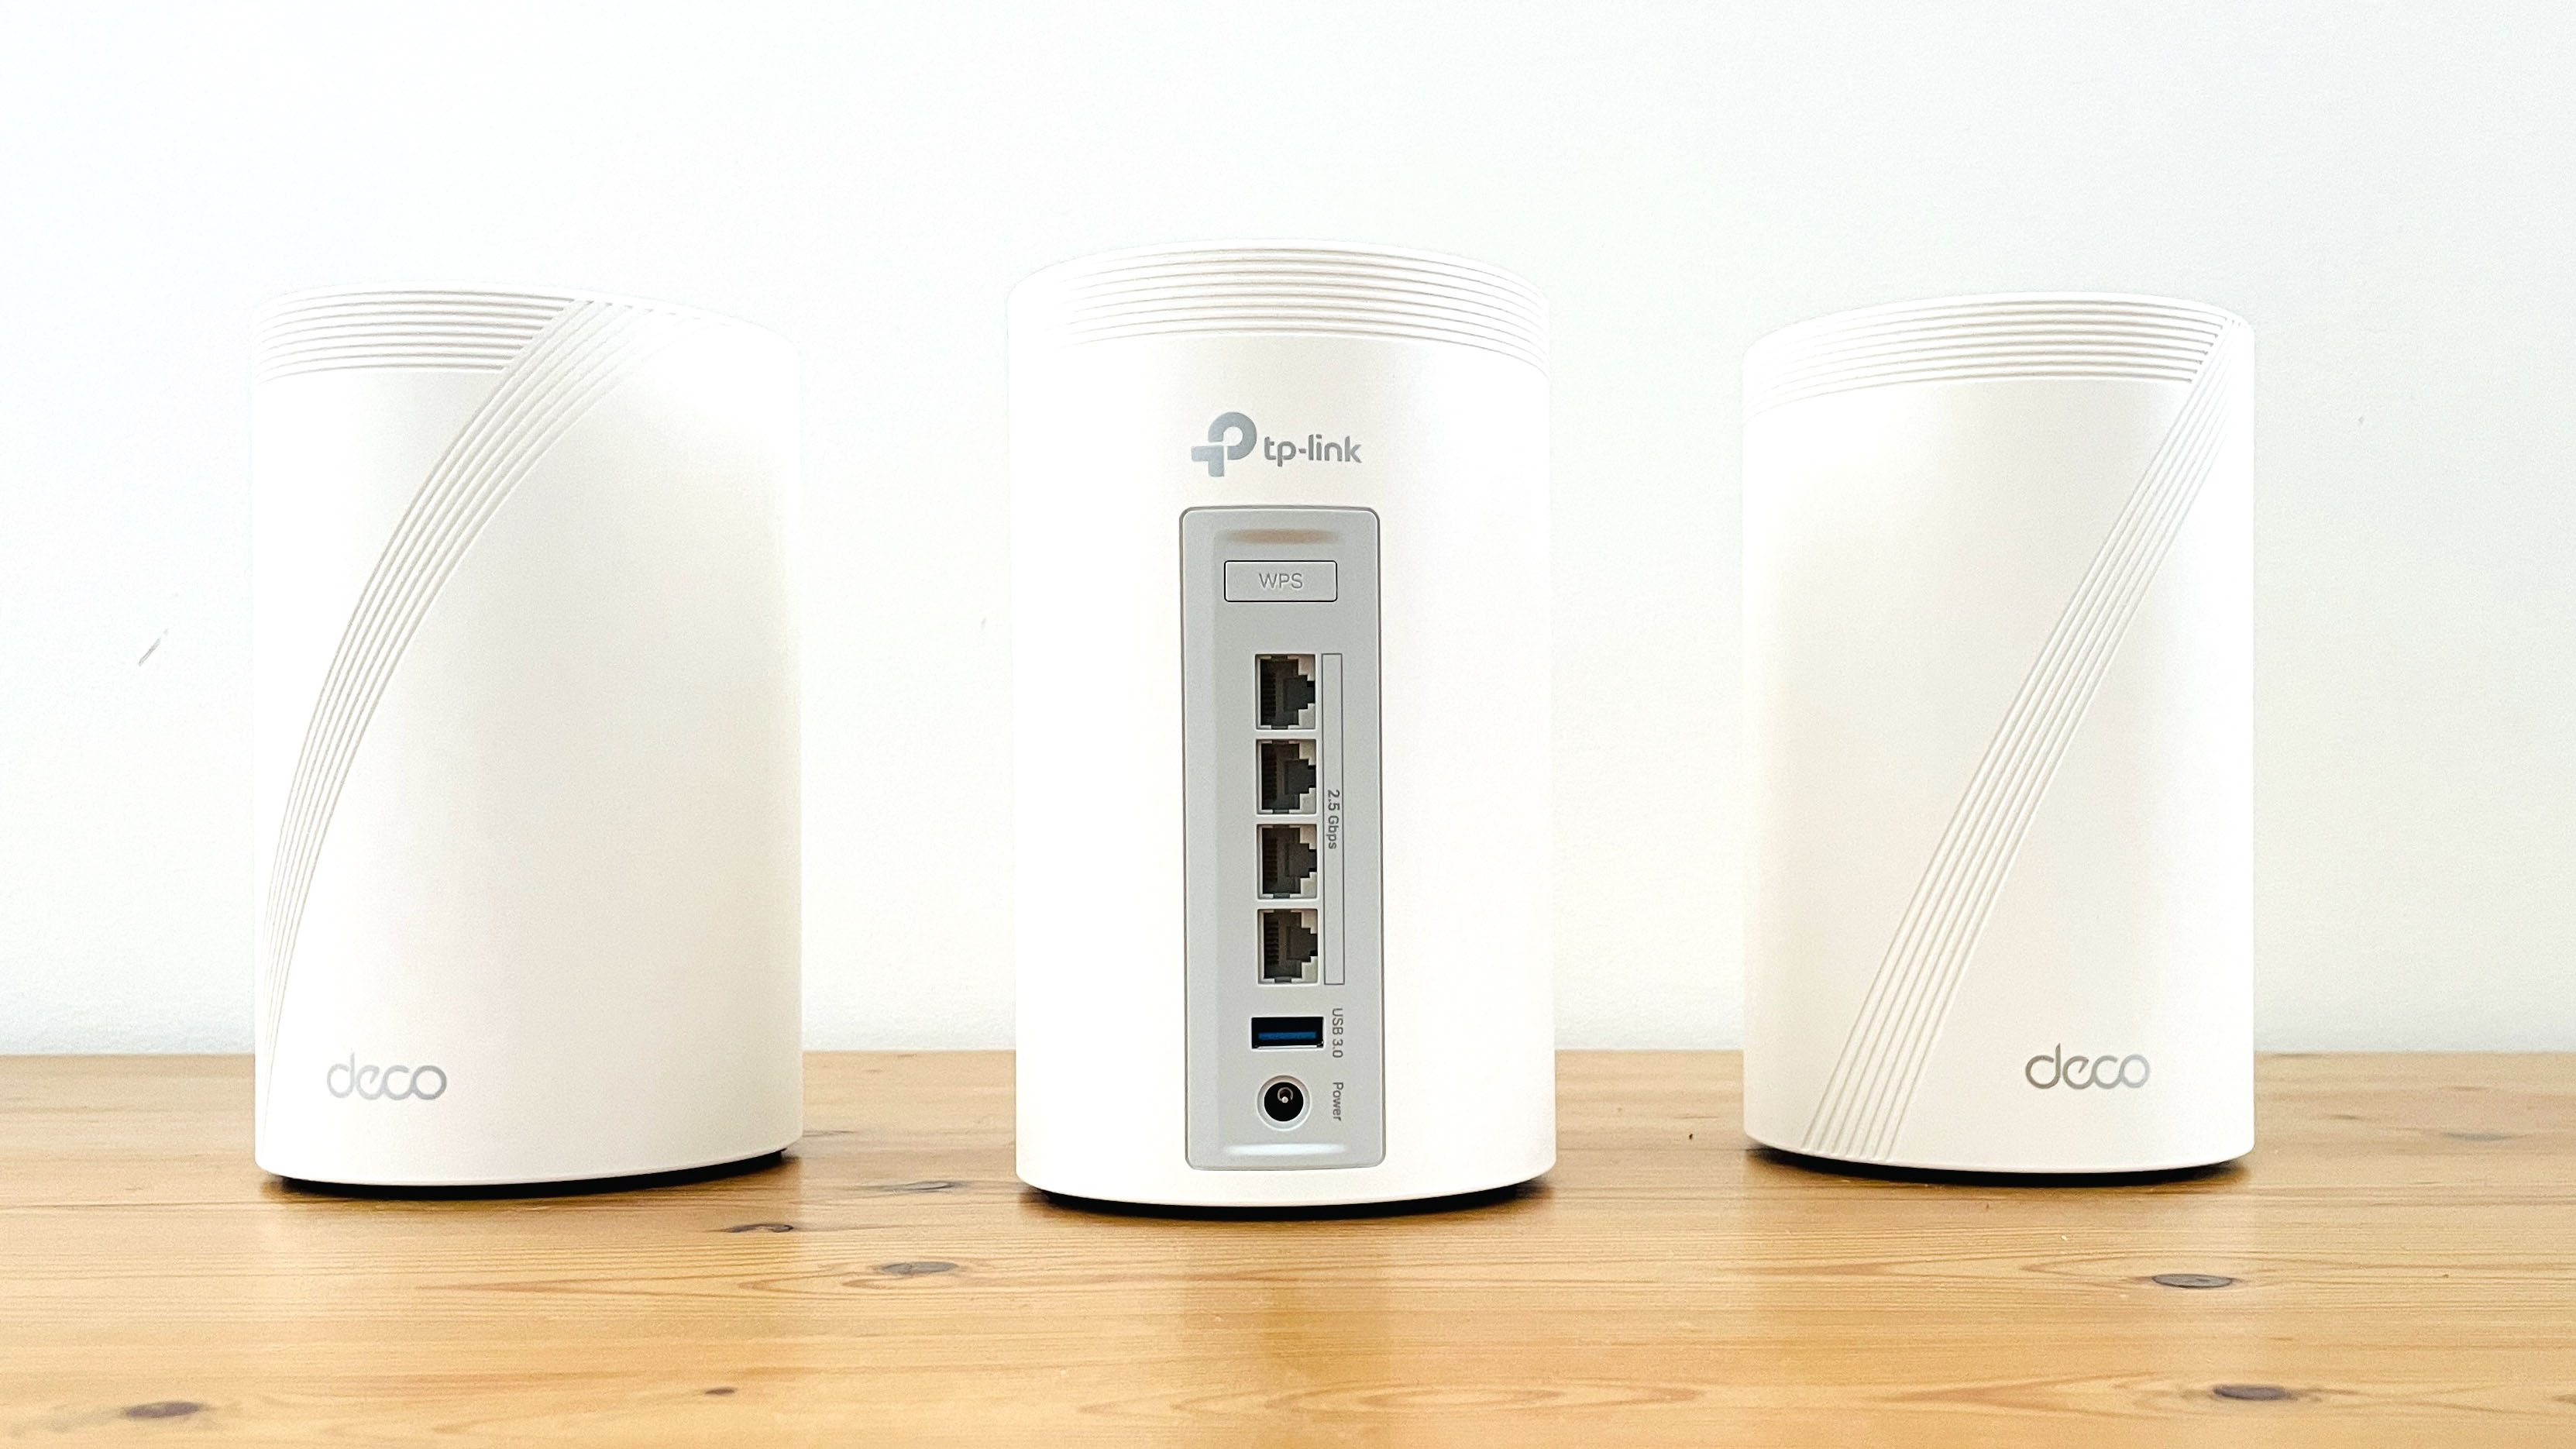 TP-Link Deco BE63 - 3 devices showing ports